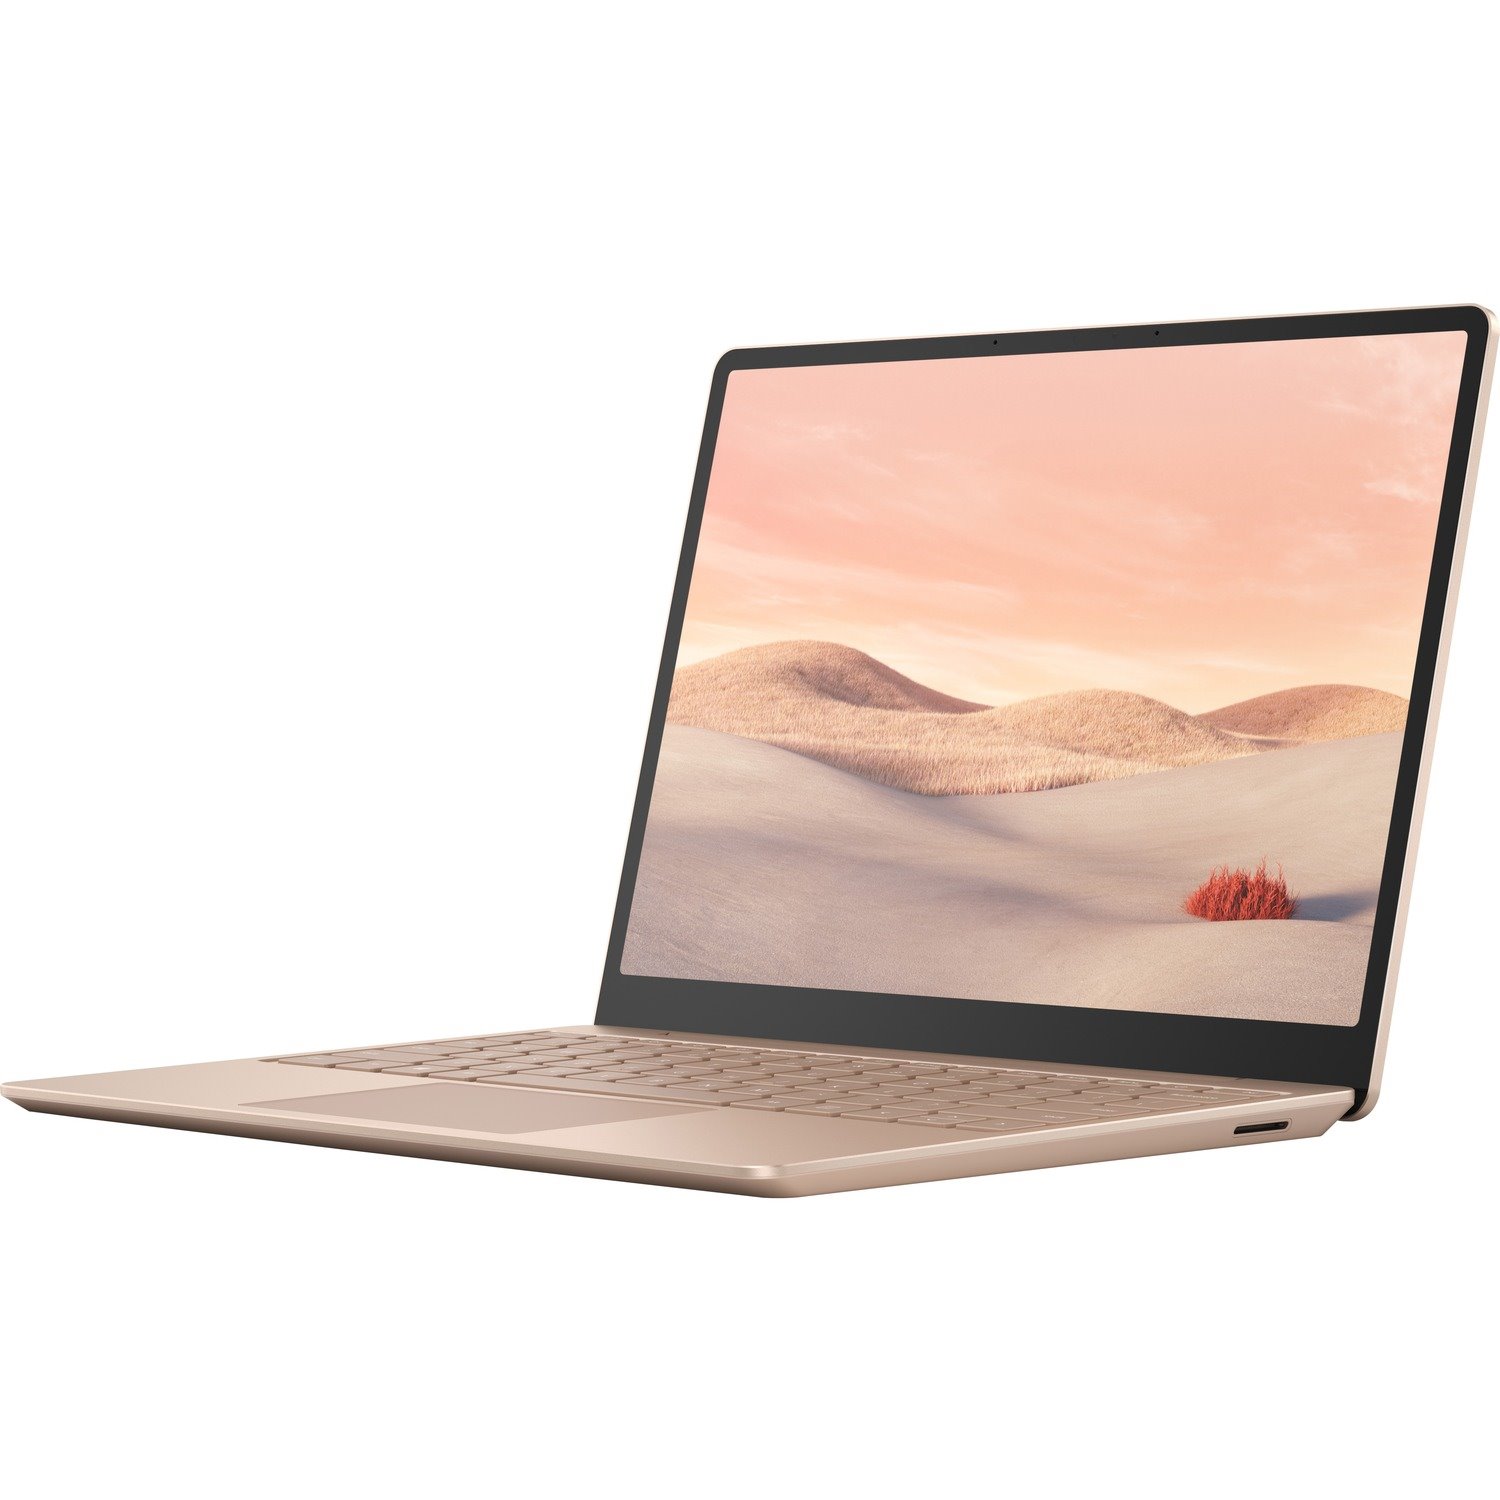 Microsoft Surface Laptop Go 31.5 cm (12.4") Touchscreen Notebook - 1536 x 1024 - Intel Core i5 10th Gen i5-1035G1 1 GHz - 8 GB Total RAM - 256 GB SSD - Sandstone - Min of 5 purchase in one order.